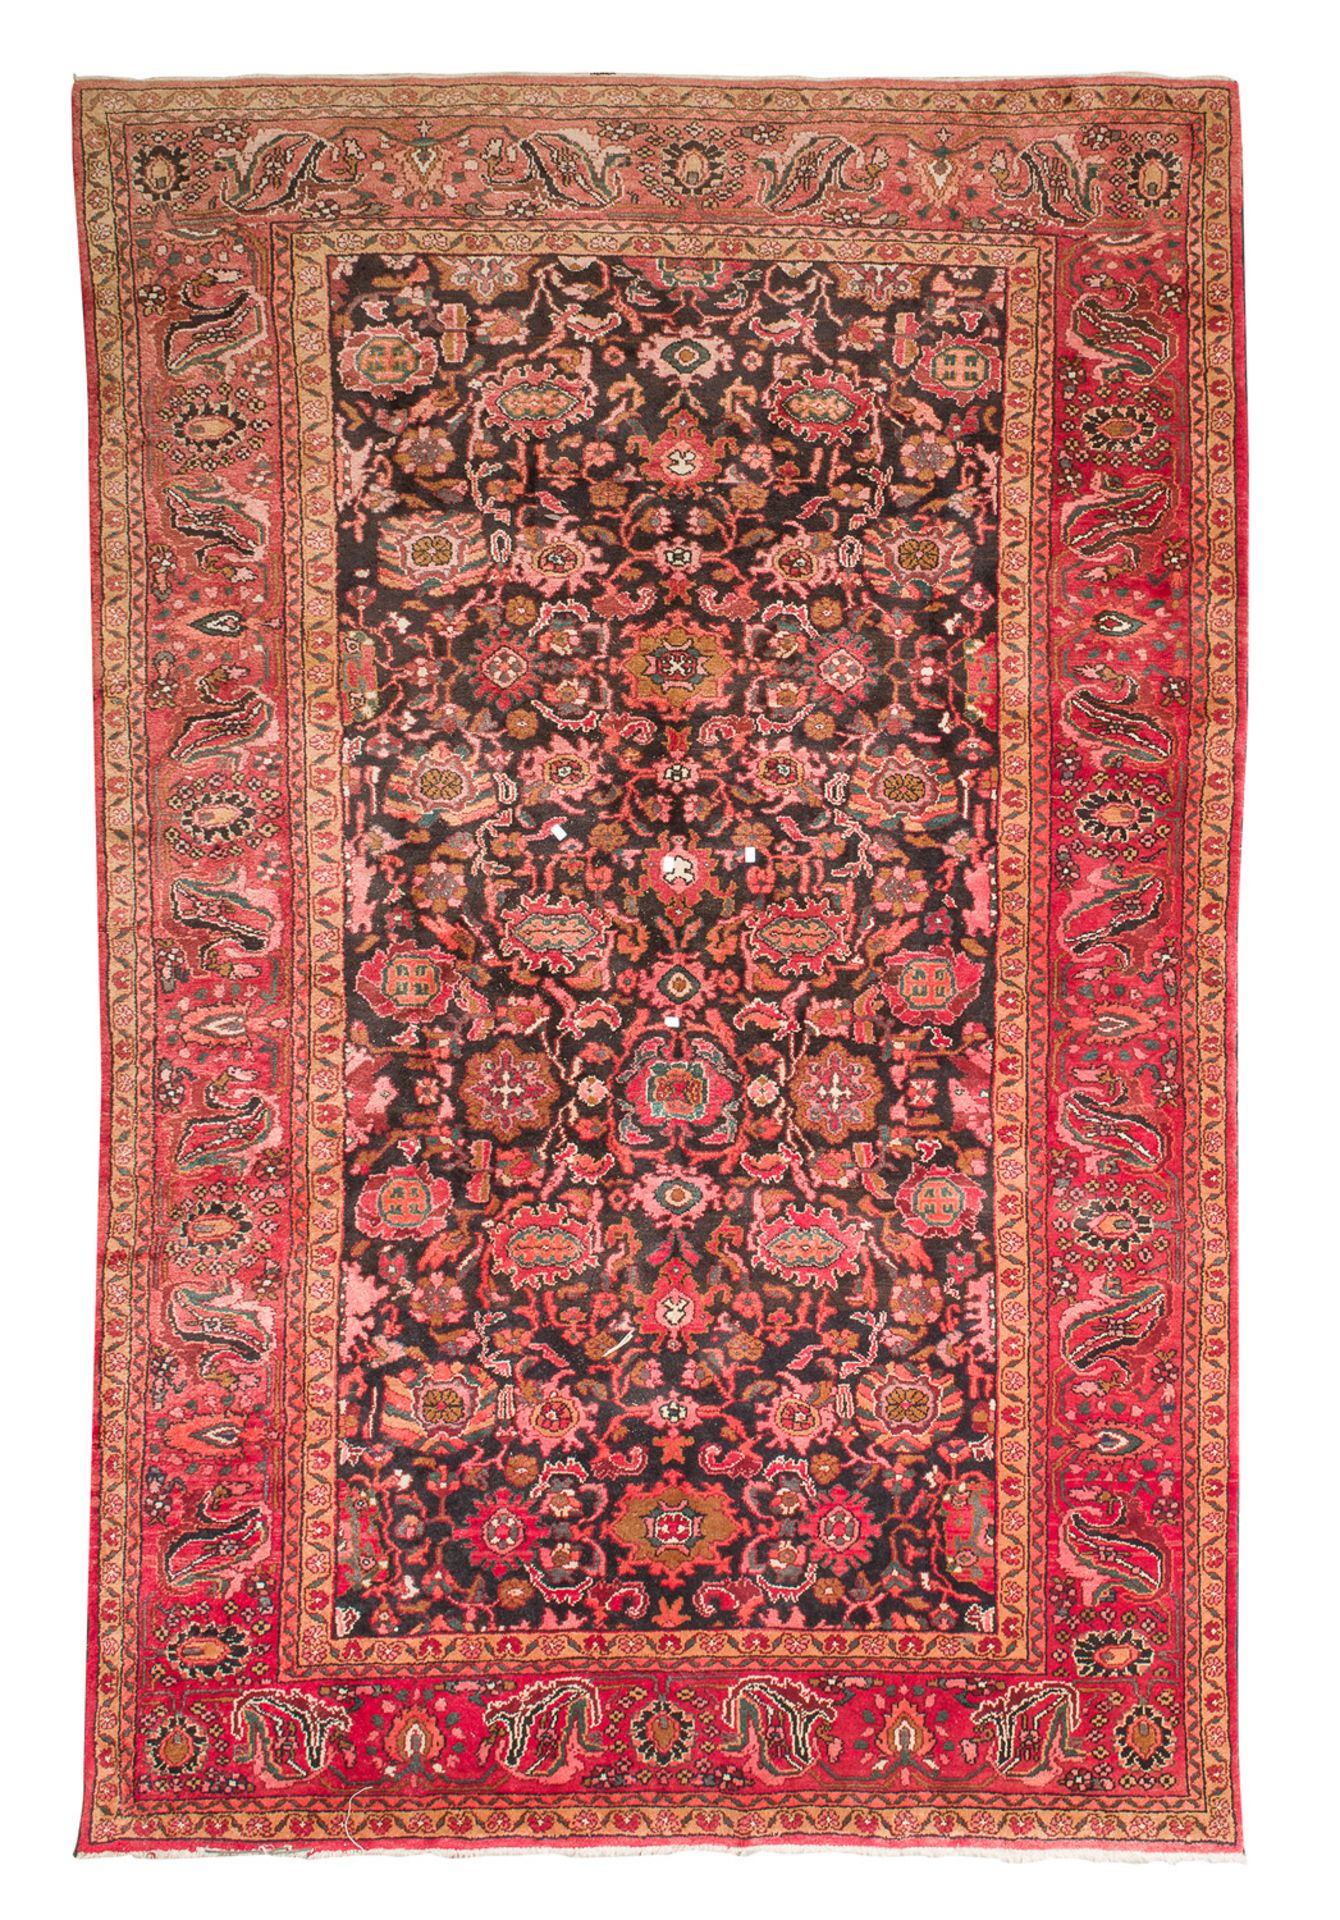 MASHED RUG FIRST HALF 20TH CENTURY